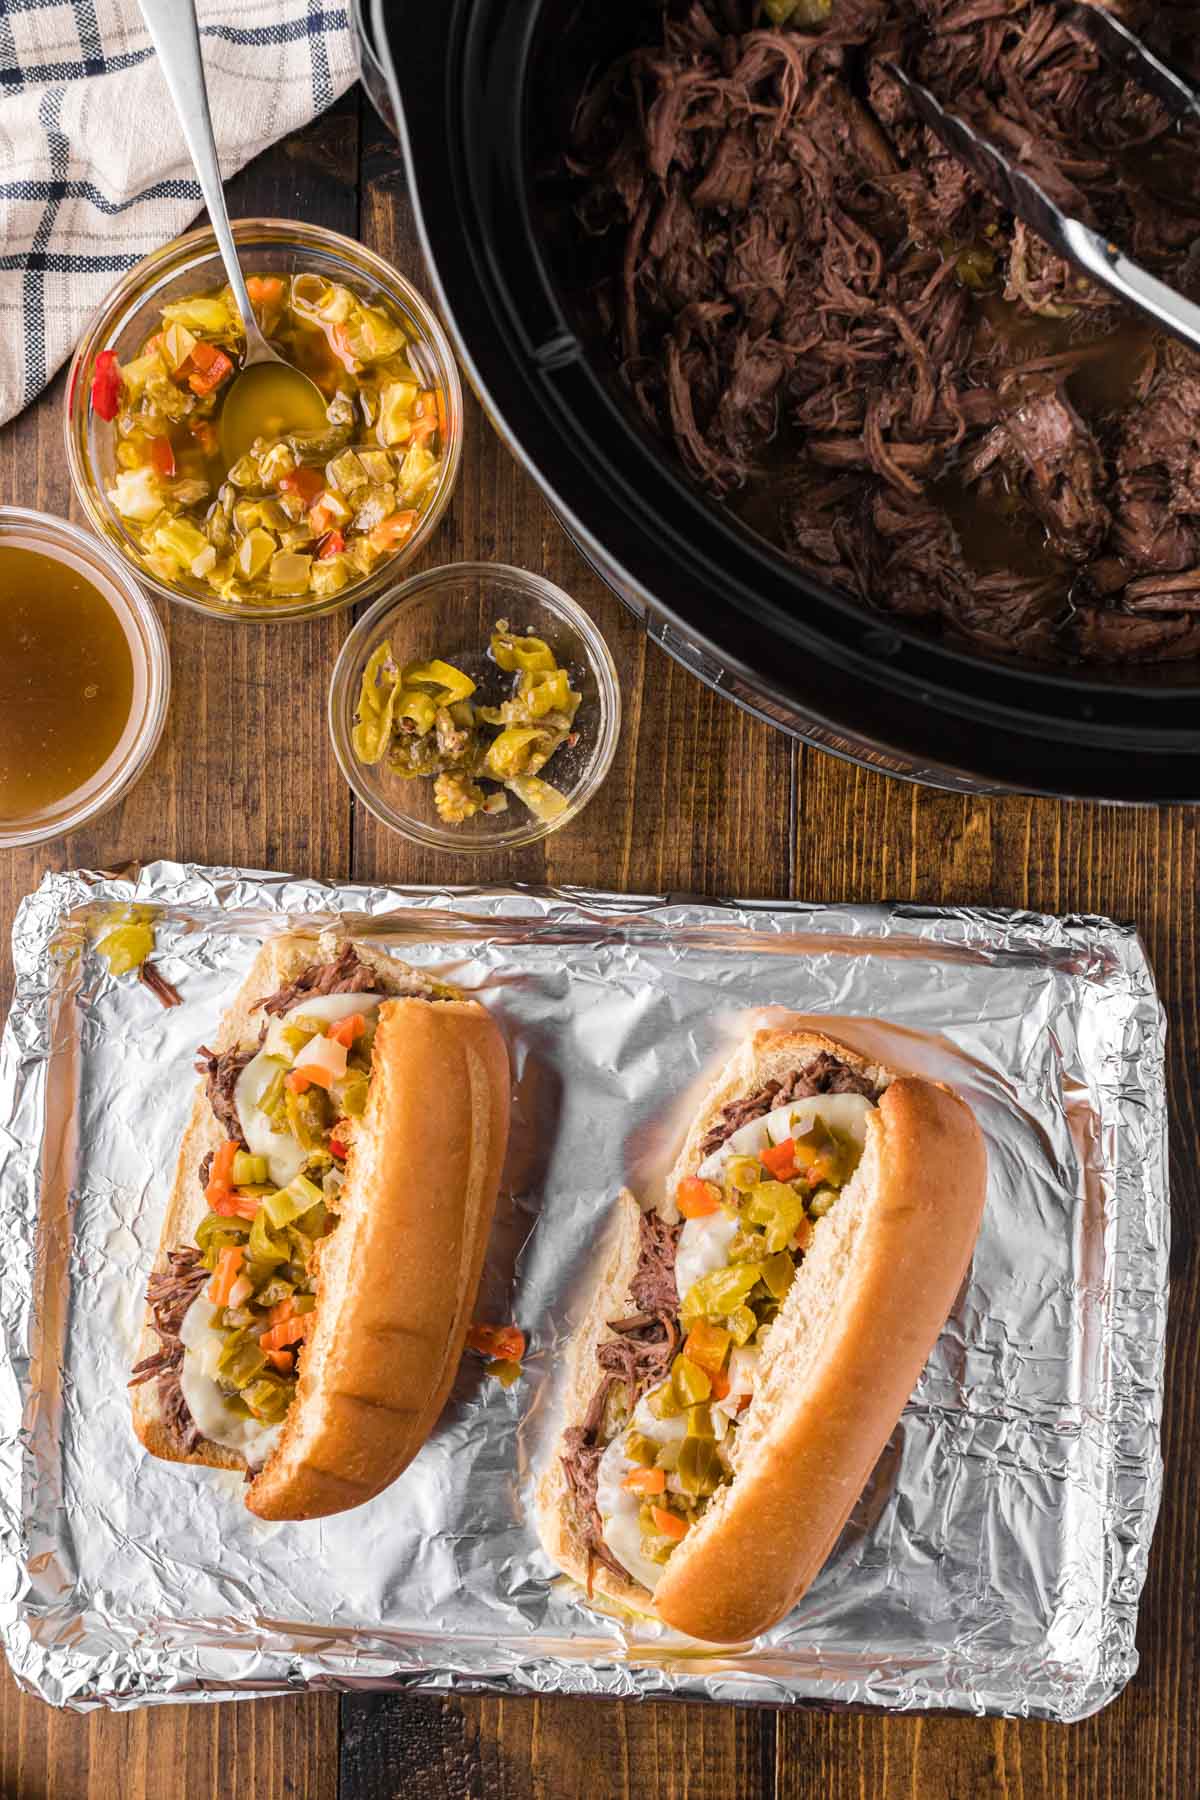 Two Italian Beef sandwiches on a baking sheet with the slow cooker full of beef set on a wooden table.